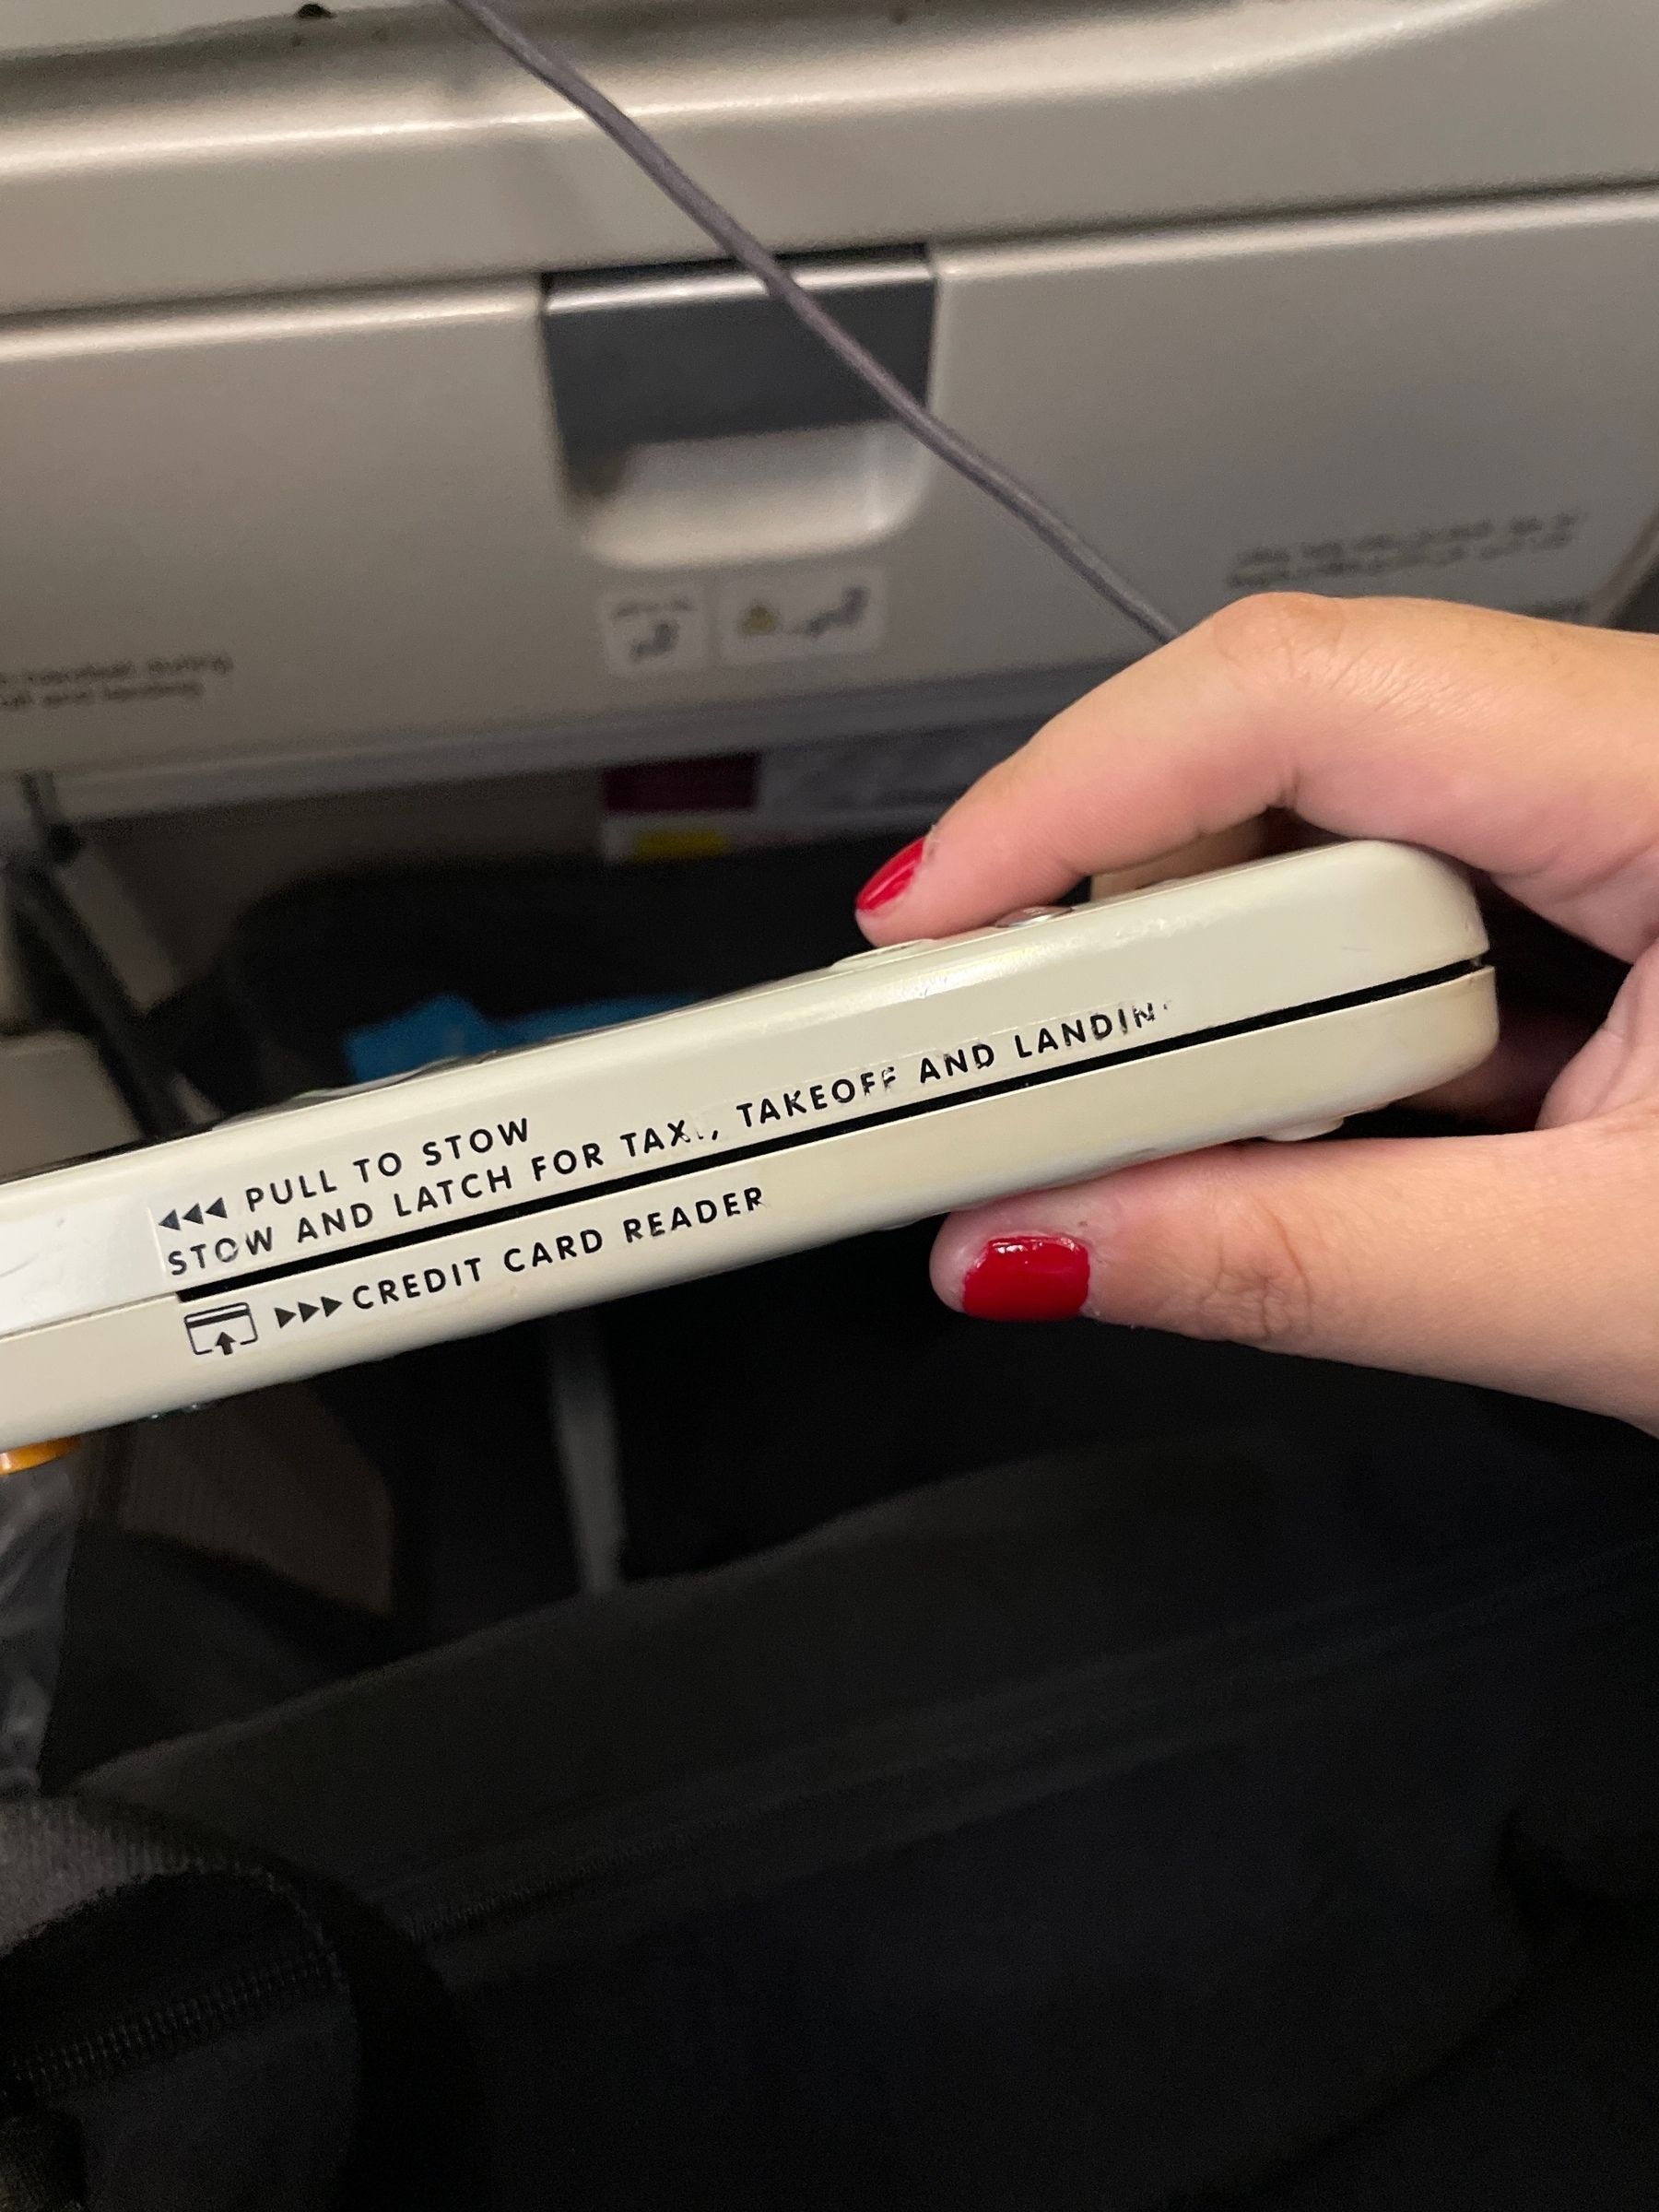 A credit card reader seen on the side of the remote available for in-flight entertainment in an airplane. The text above the card slot reads: "Pull to Stow | Stow and Latch for taxi, takeoff and landing"